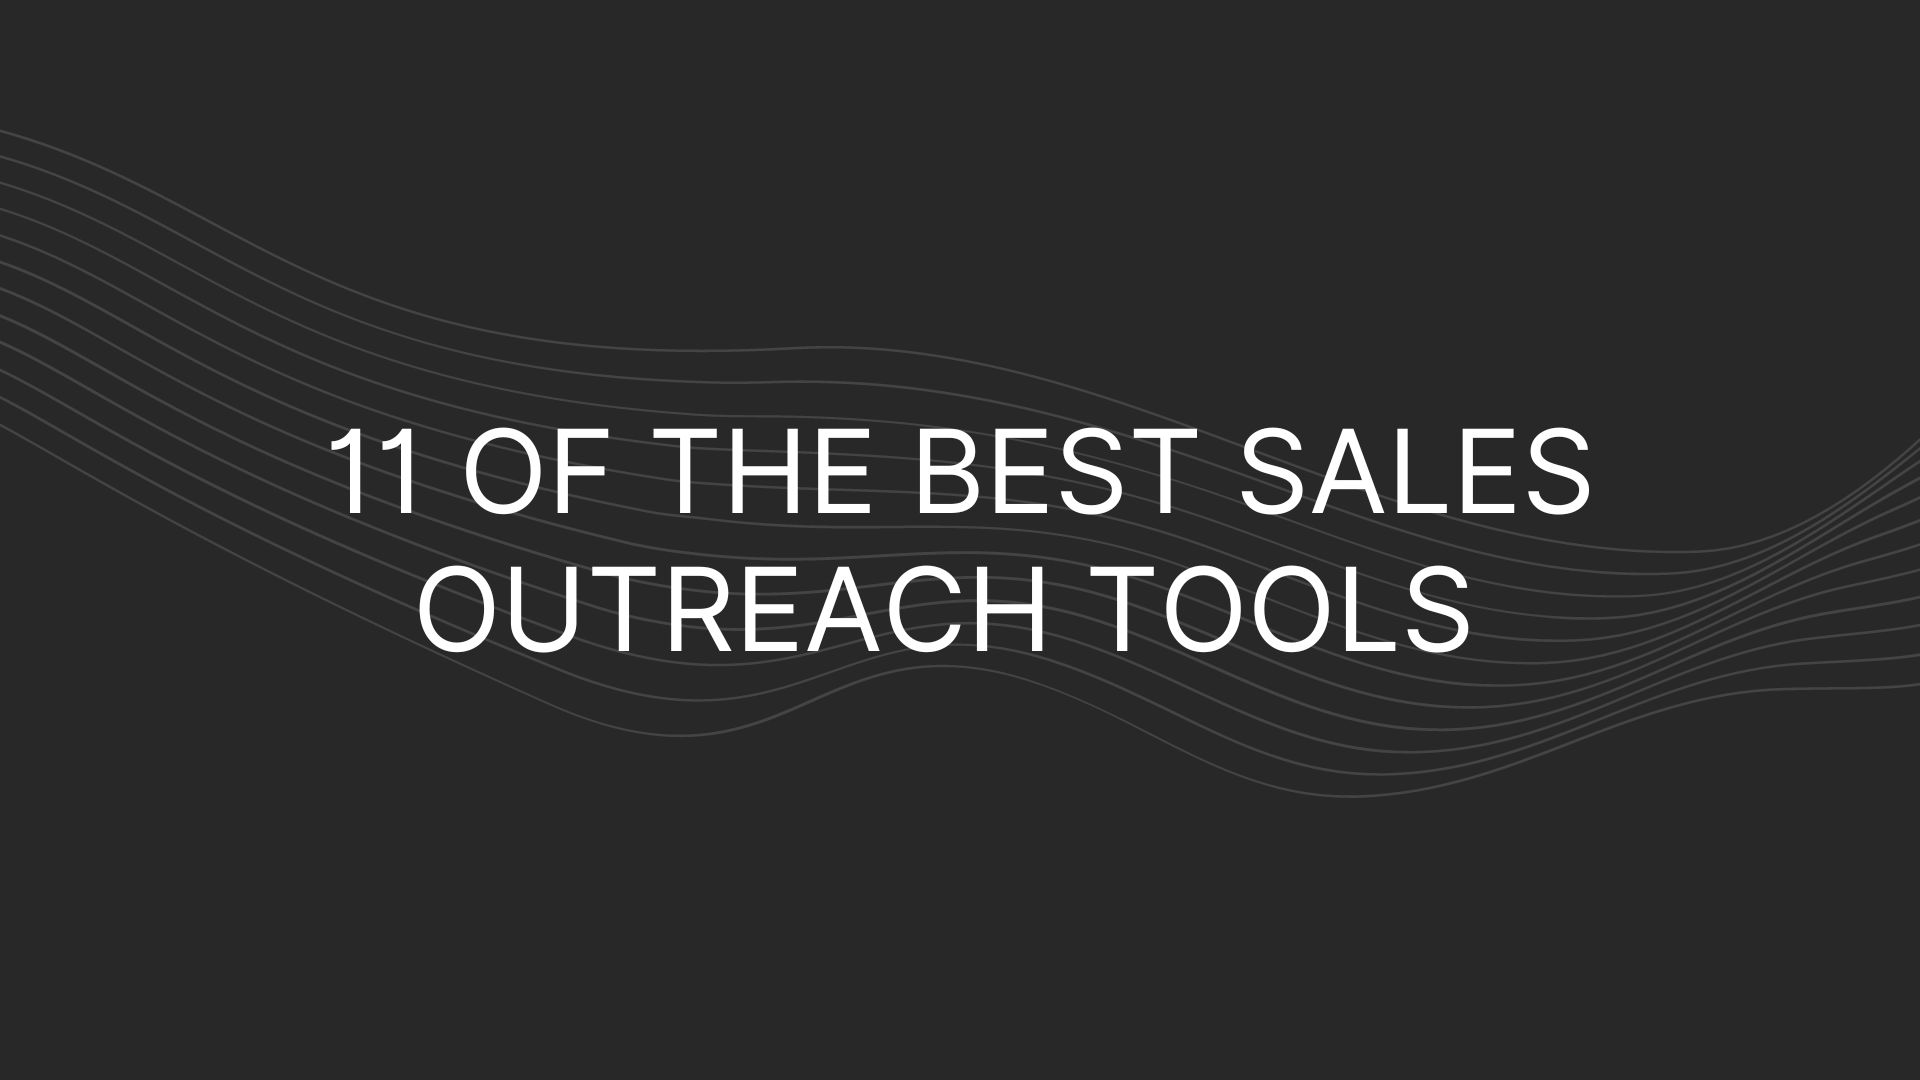 11 Of The Best Sales Outreach Tools